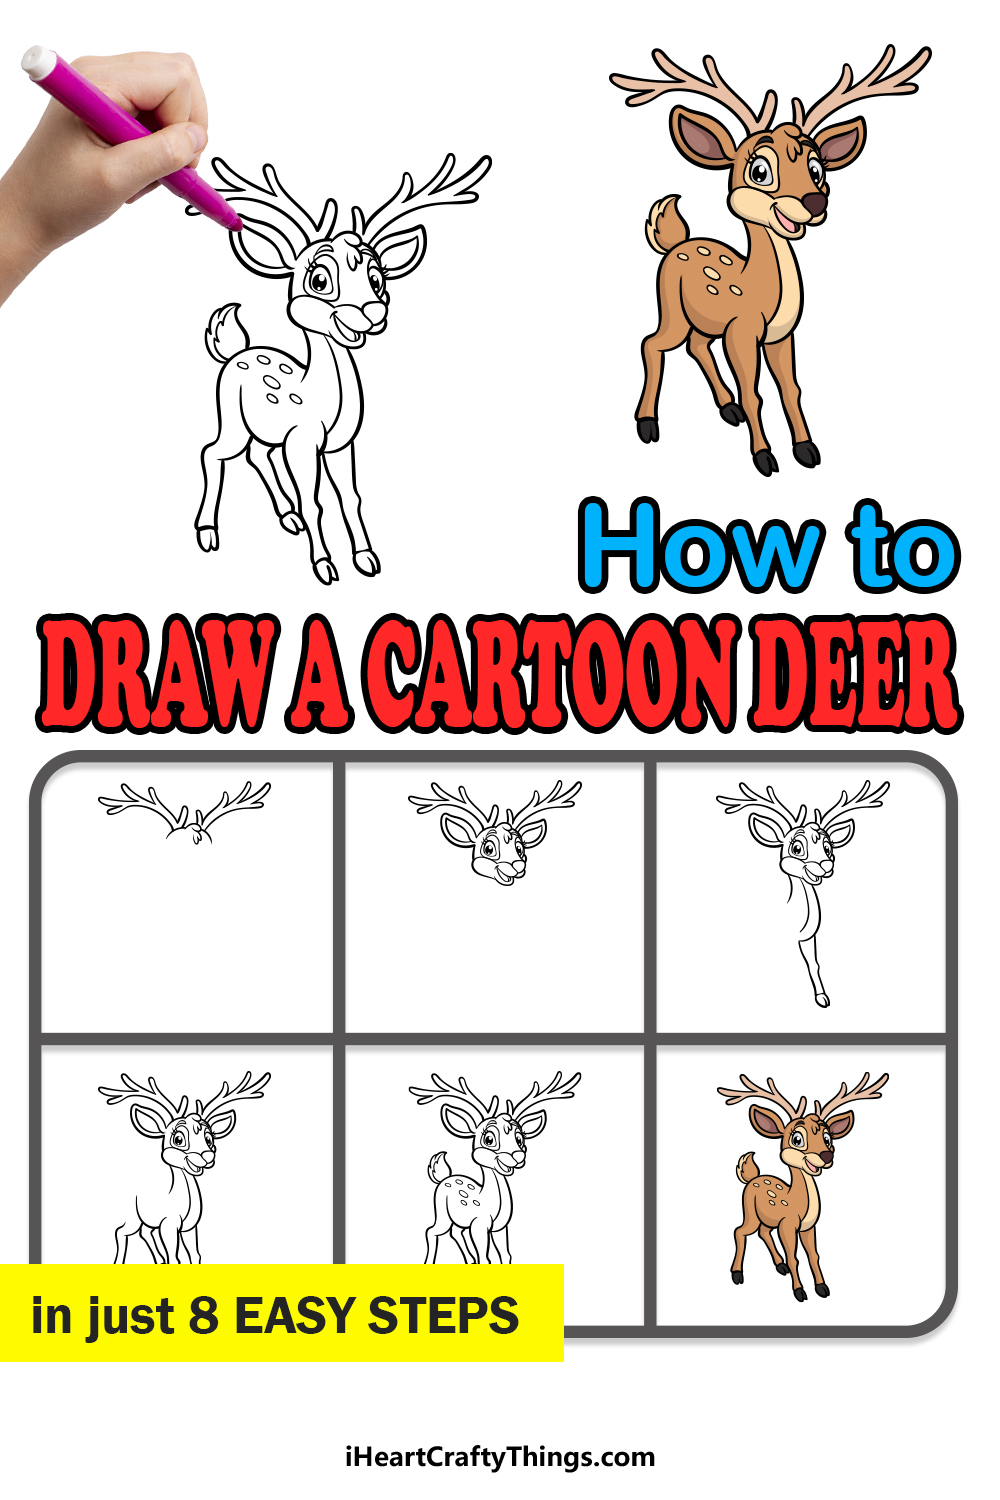 how to draw a cartoon deer in 8 easy steps